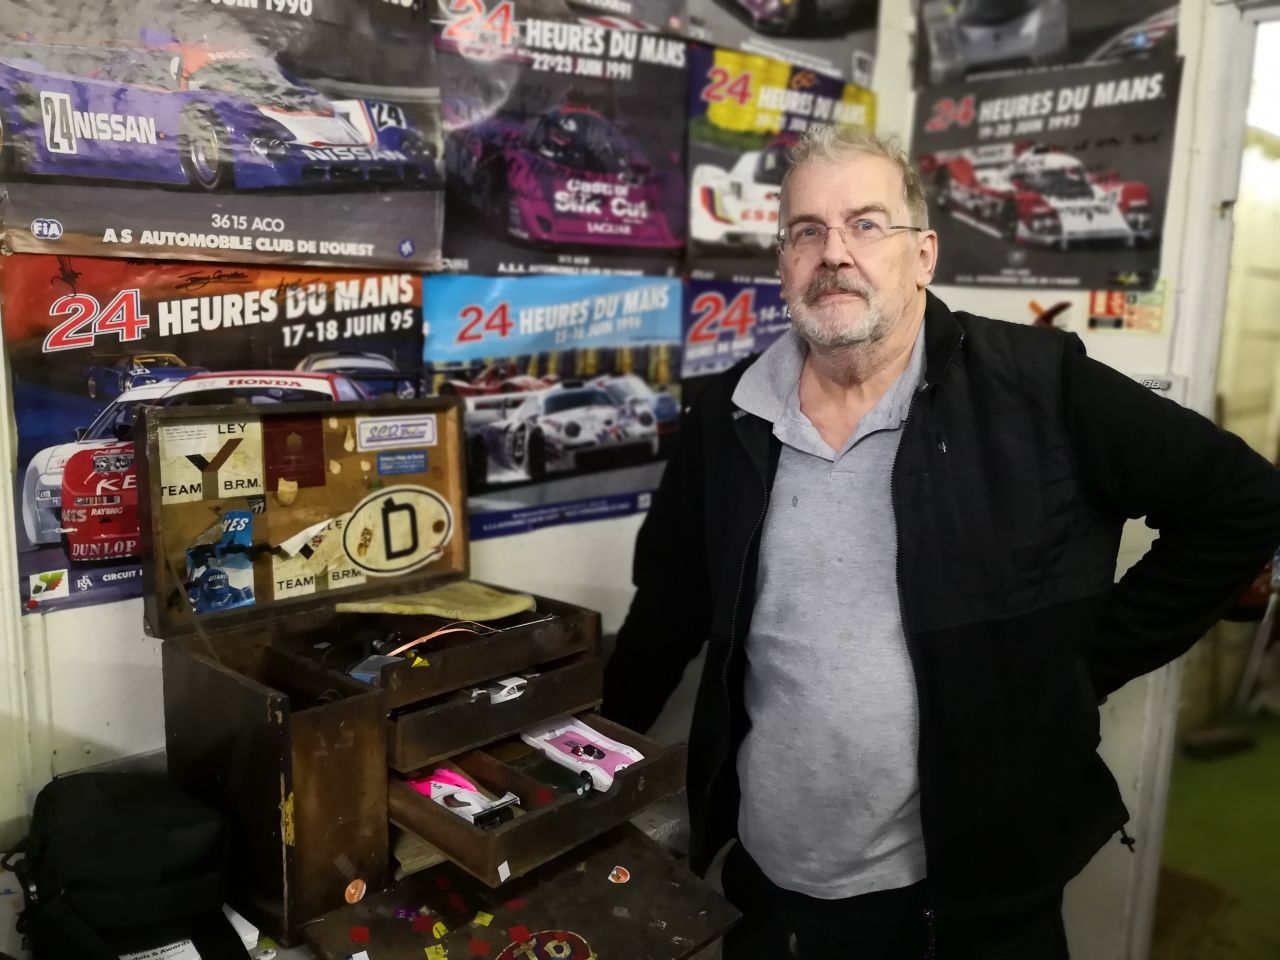 Bob Hallums, of the North London Society of Model Engineers, poses with his workshop kit on a recent racing day. Members often fine-tune slot cars at home in anticipation of their weekly racing nights. 